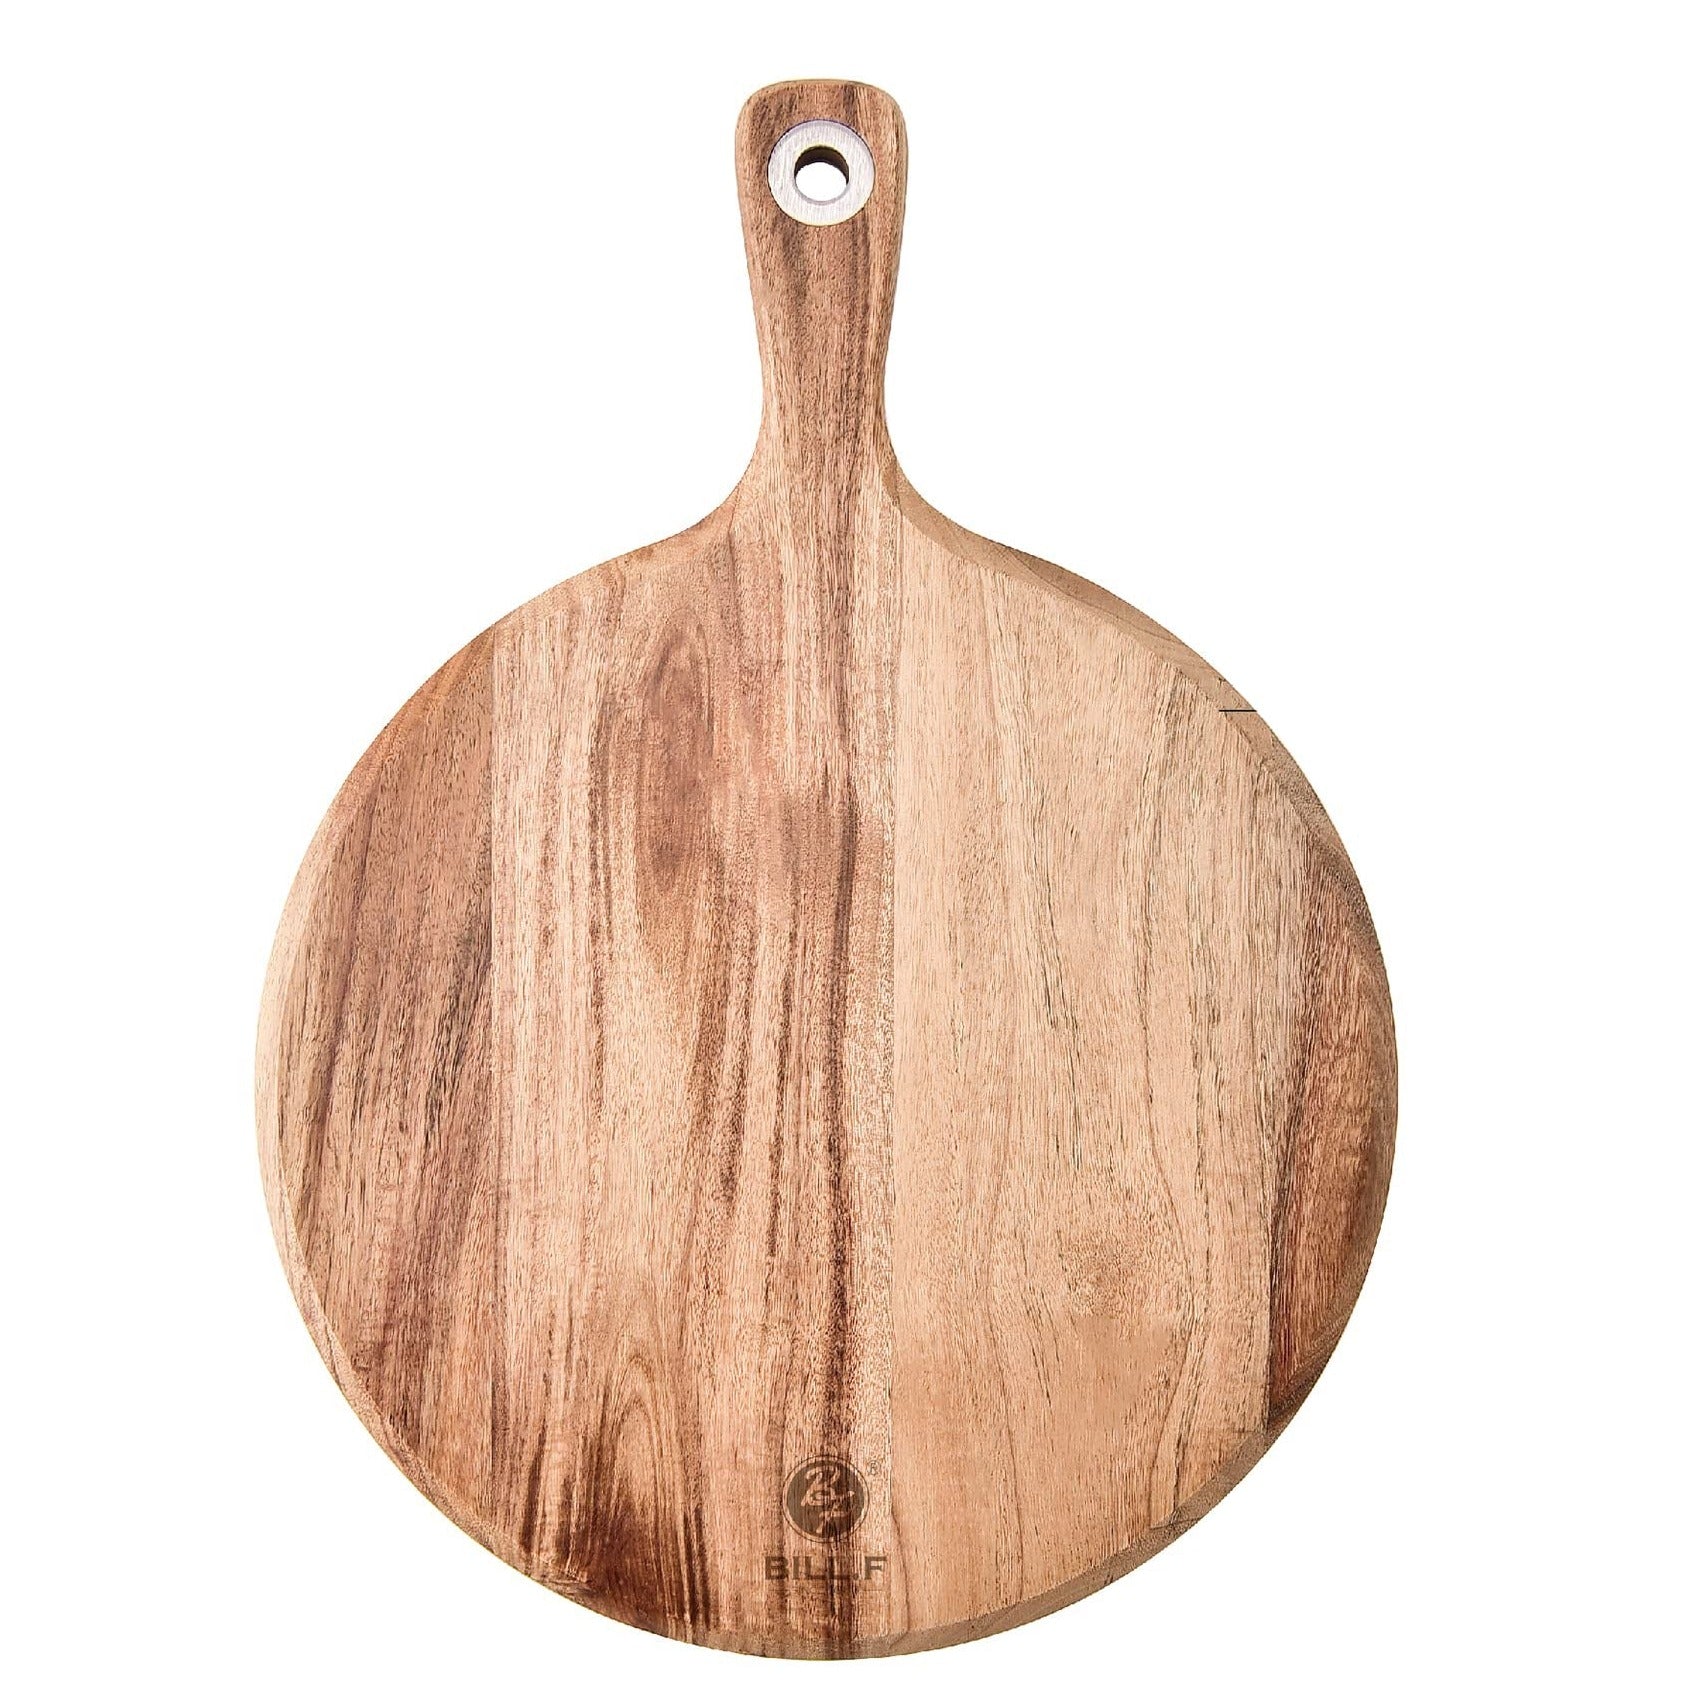 olelo Acacia Pizza Cutting Board and Pizza Cutter Set Round 11.2 inch  Wooden Pizza Peel Chopping Board With 8 Grooves To Slice and Portion Your  Pizza